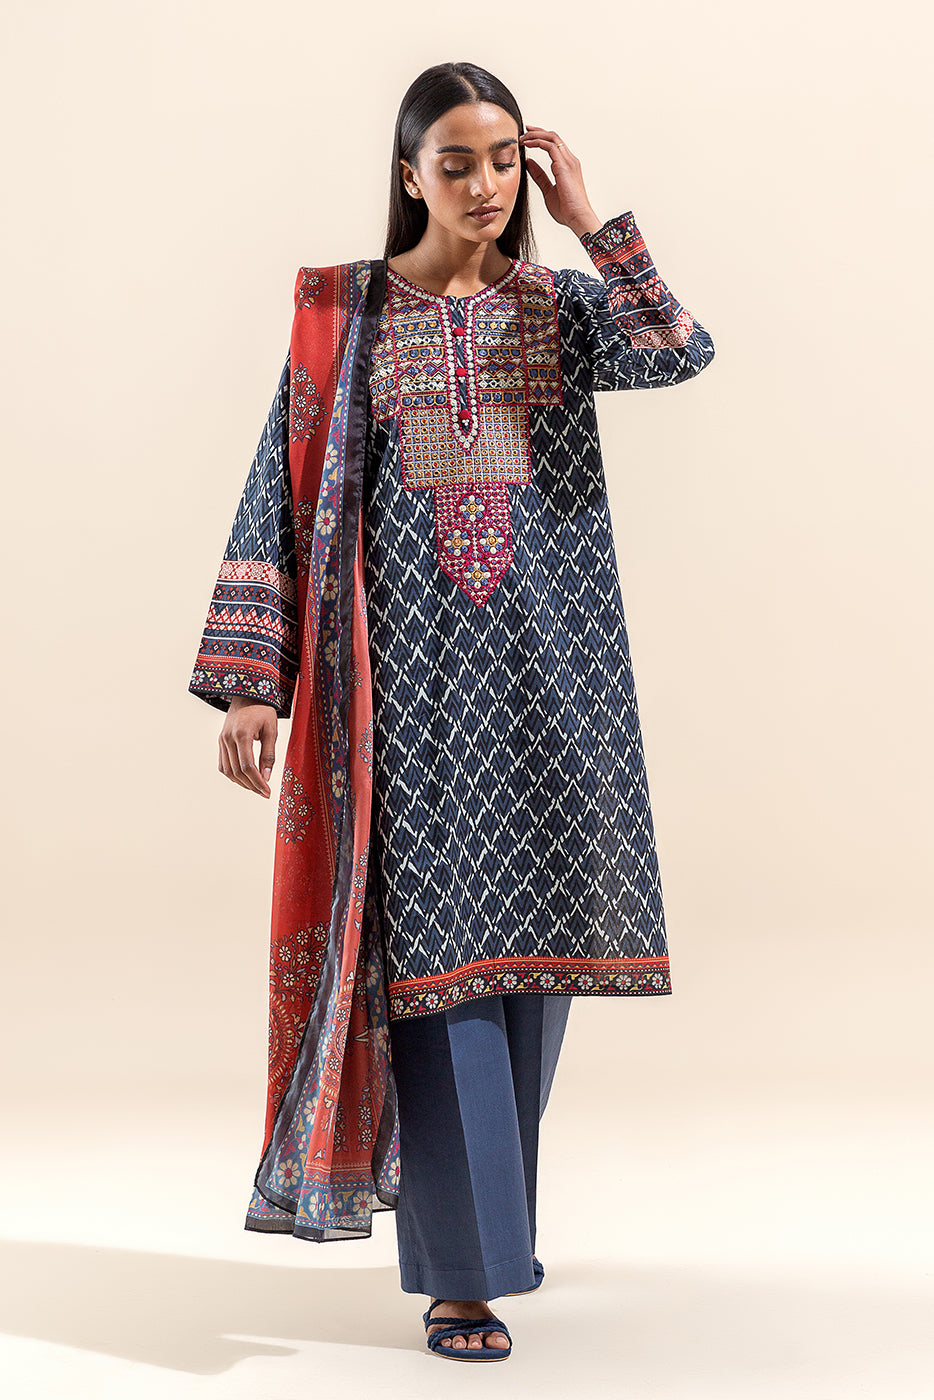 3 PIECE EMBROIDERED LAWN SUIT-SAPPHIRE FOLK (UNSTITCHED)